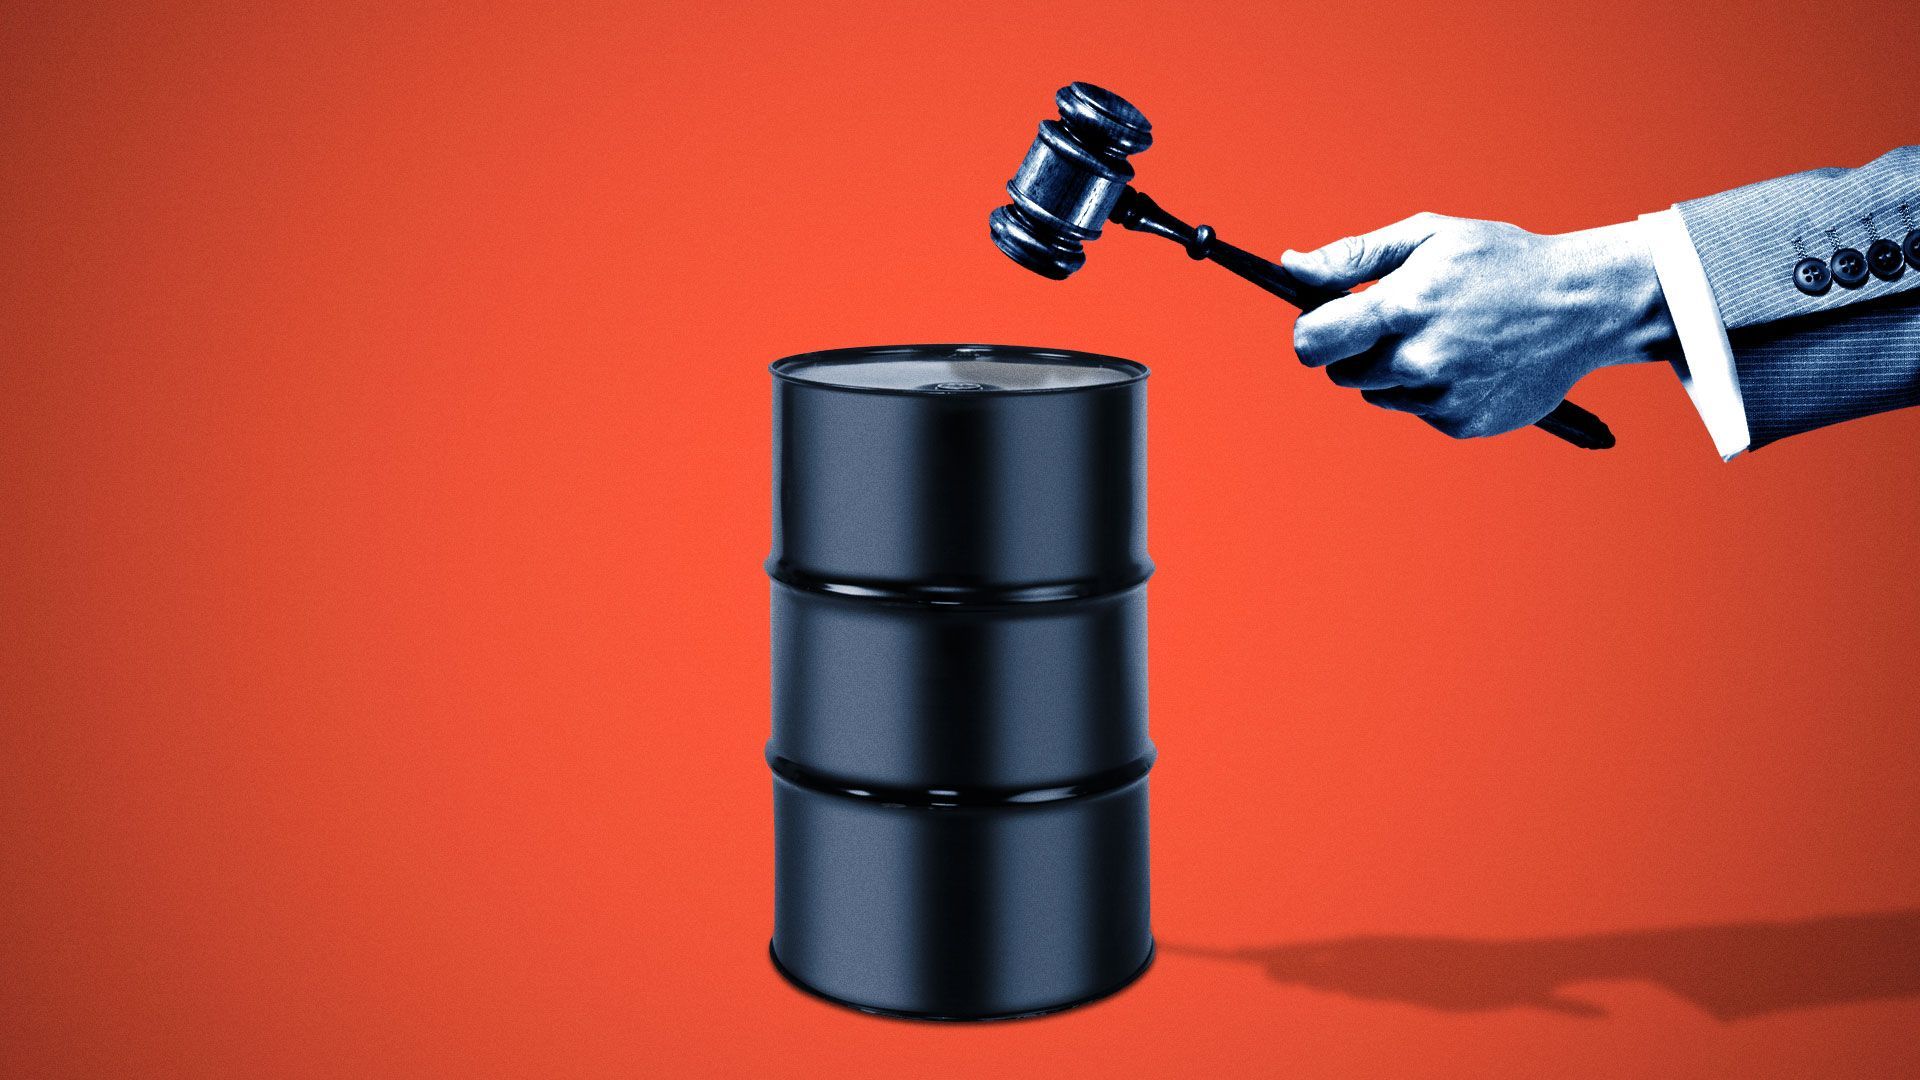 Illustration of suited hand with gavel about to hit the oil barrel